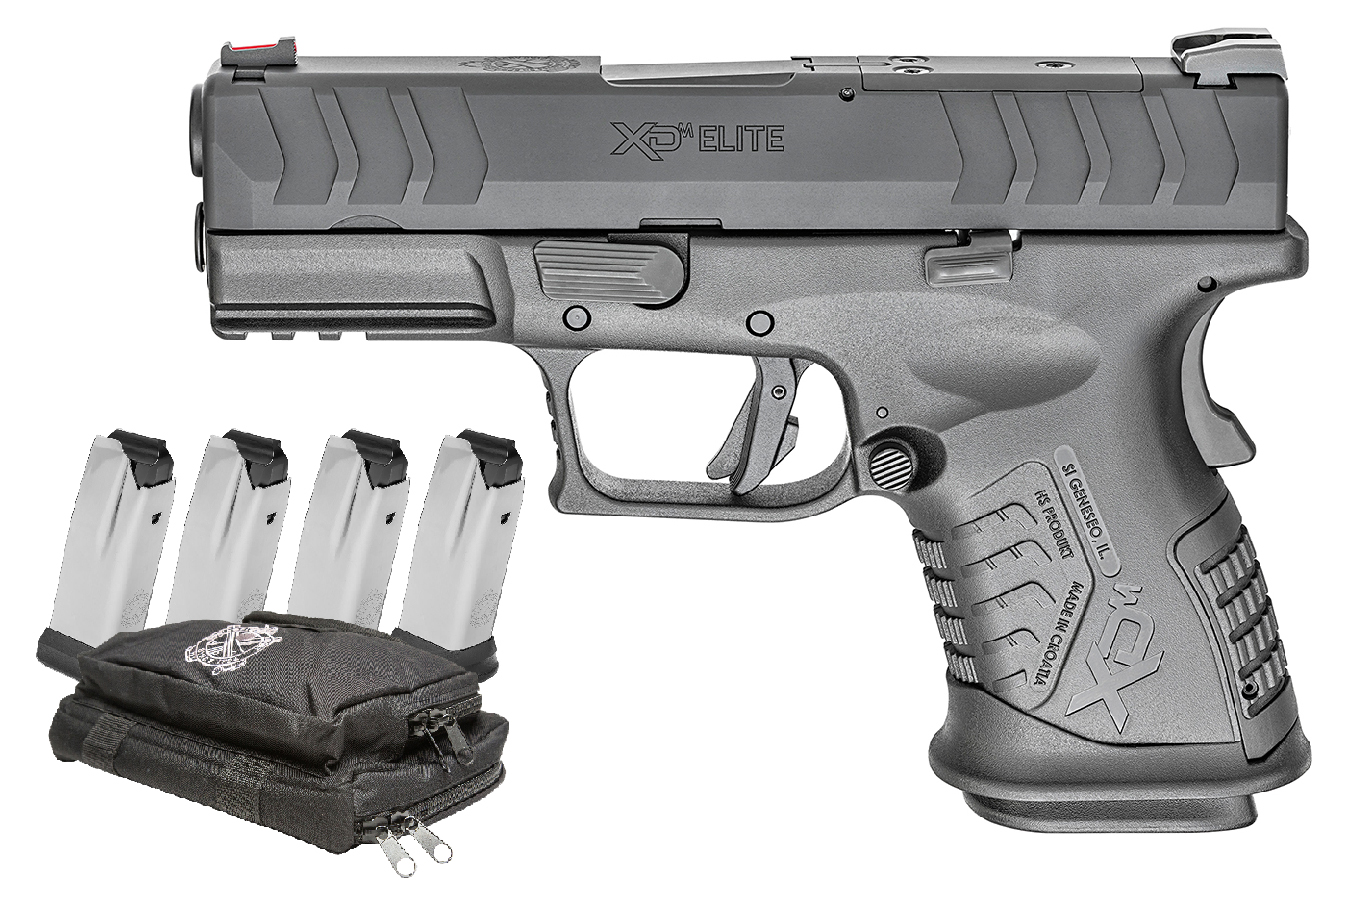 No. 18 Best Selling: SPRINGFIELD XDM ELITE COMPACT OSP 45ACP 3.8` GEAR UP